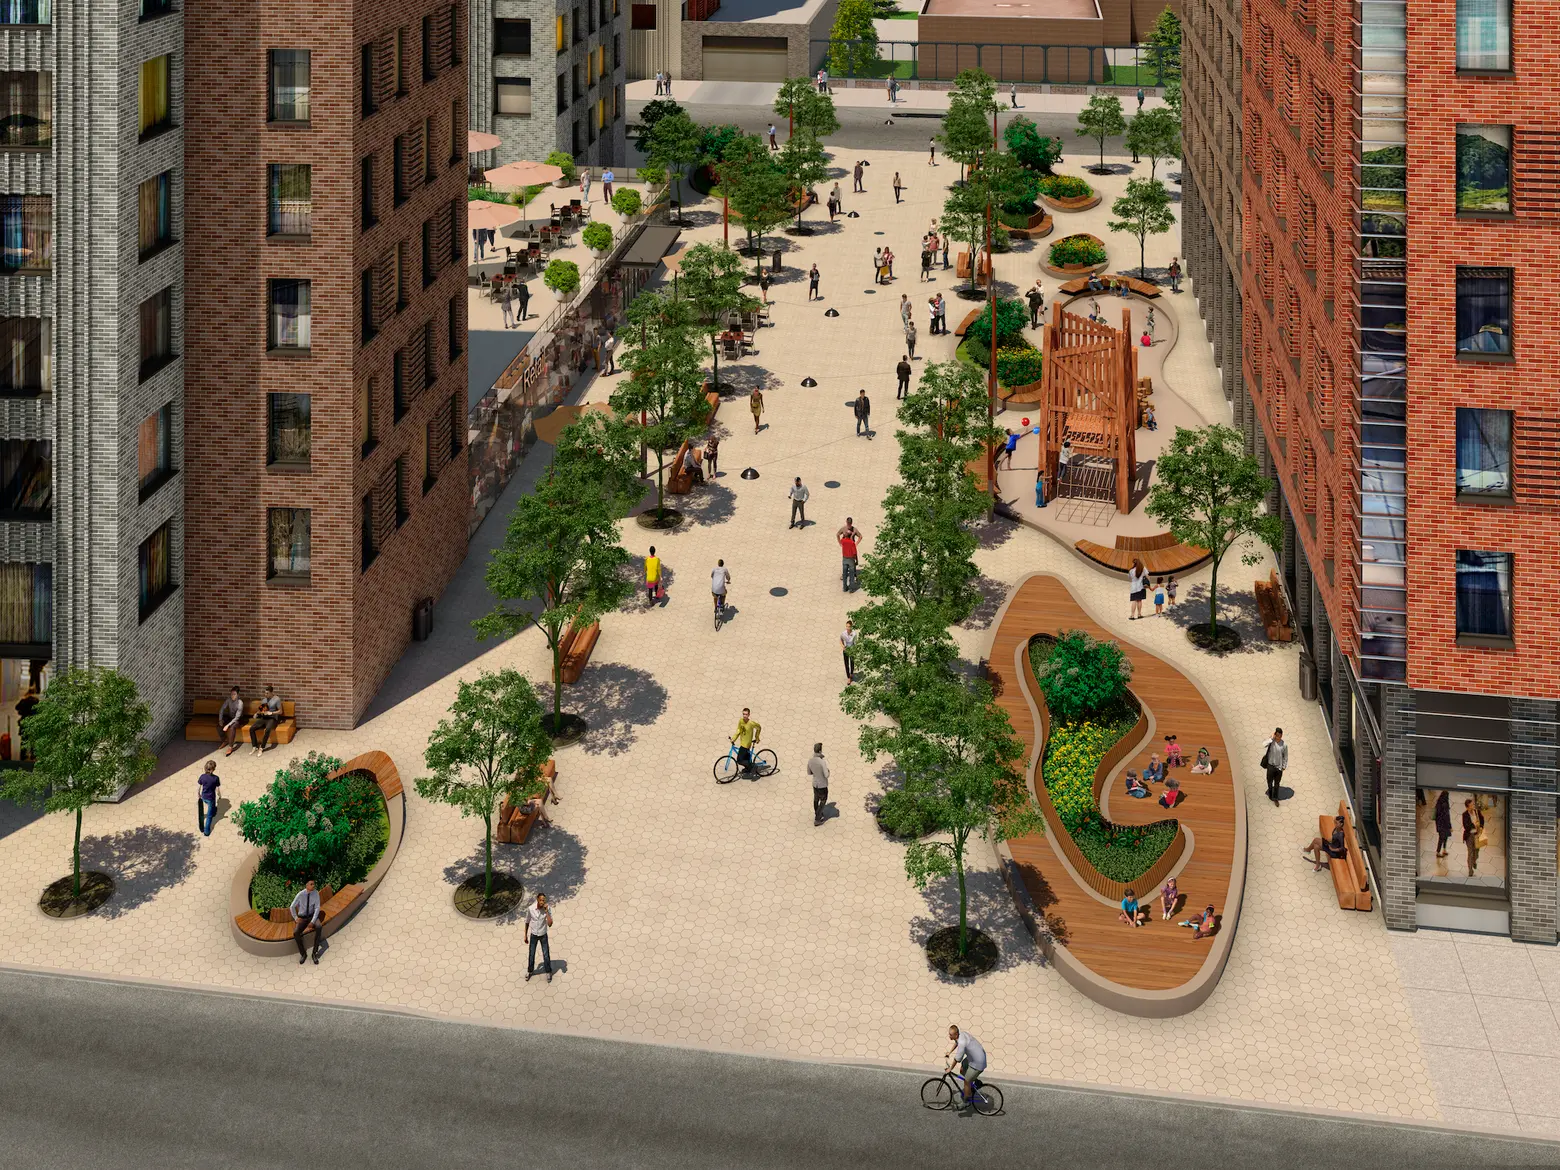 Edgemere Commons, Edgemere Queens, Aufgang Architects, Arker Companies